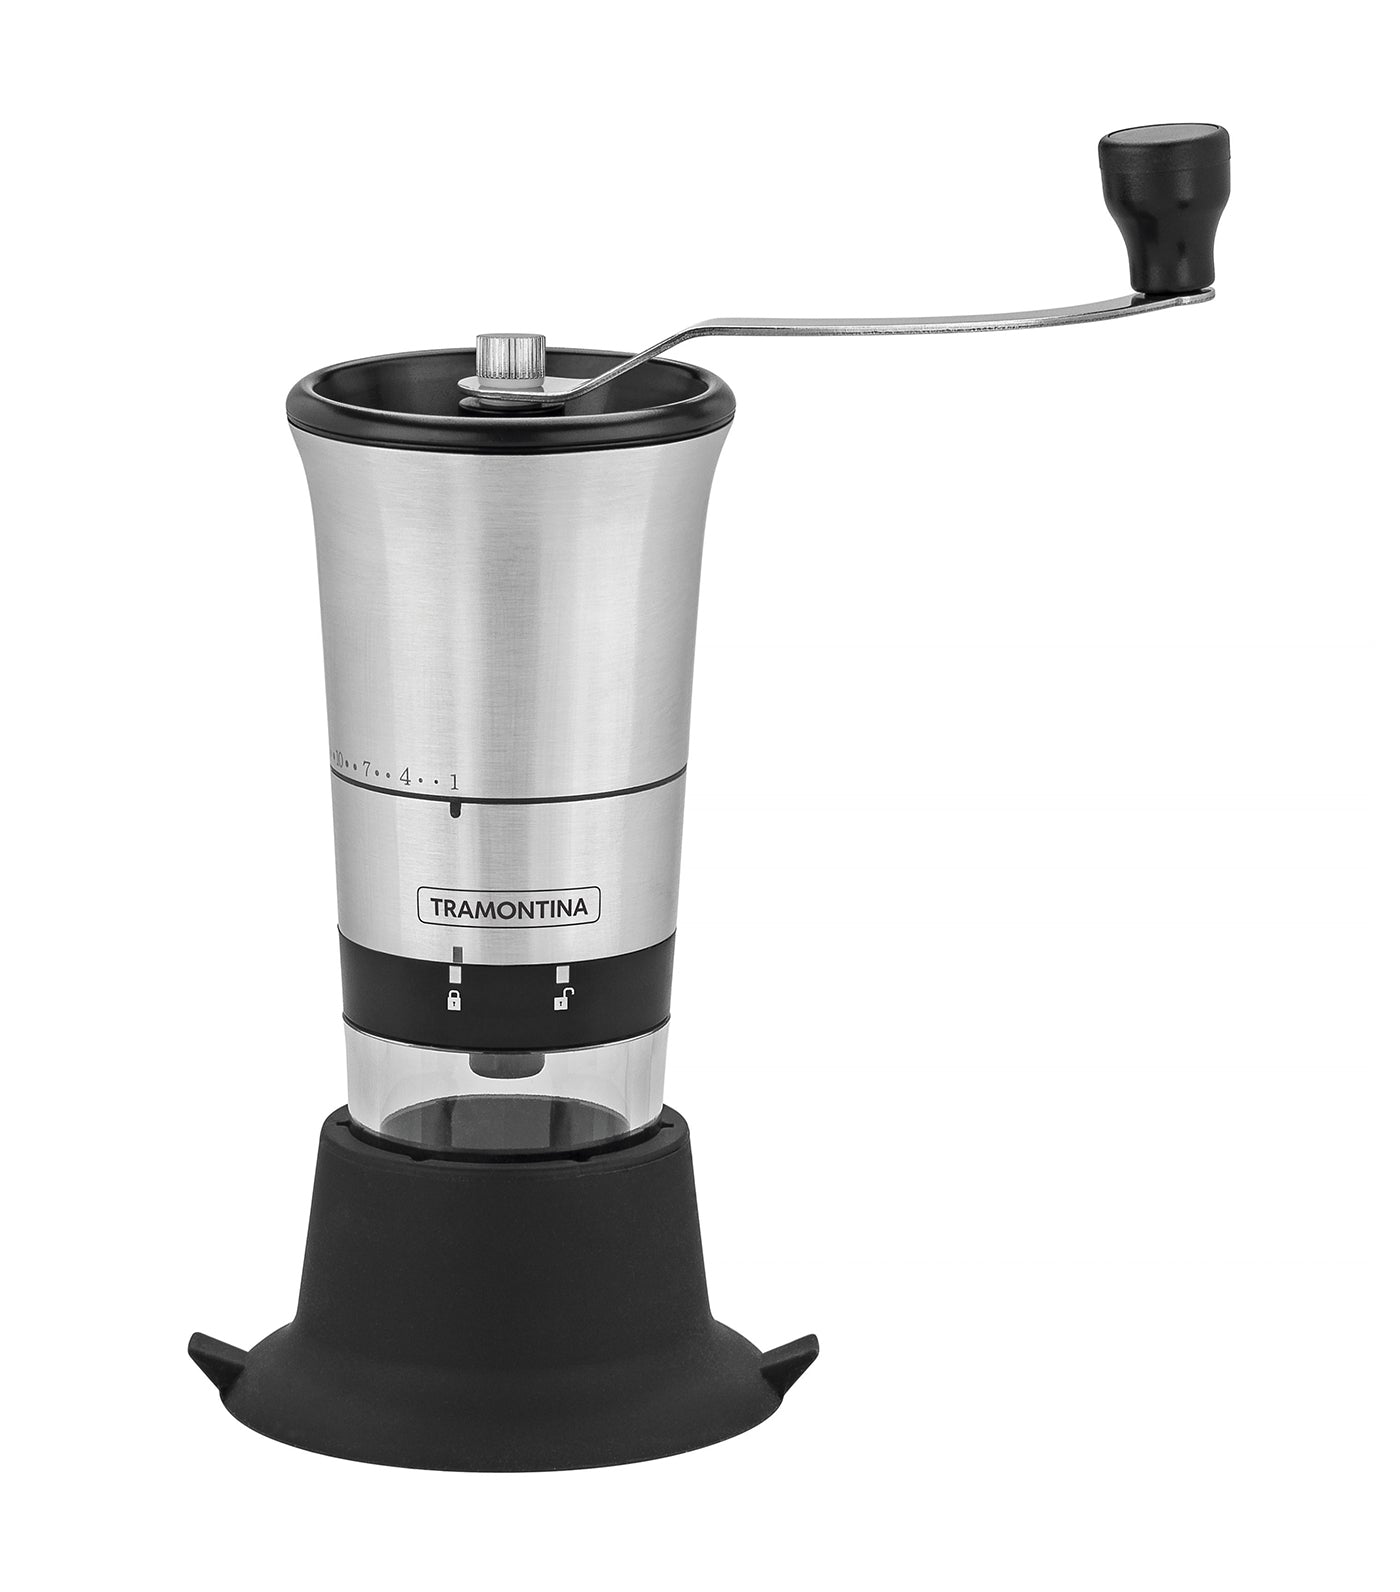 Realce Stainless Steel Coffee Grinder